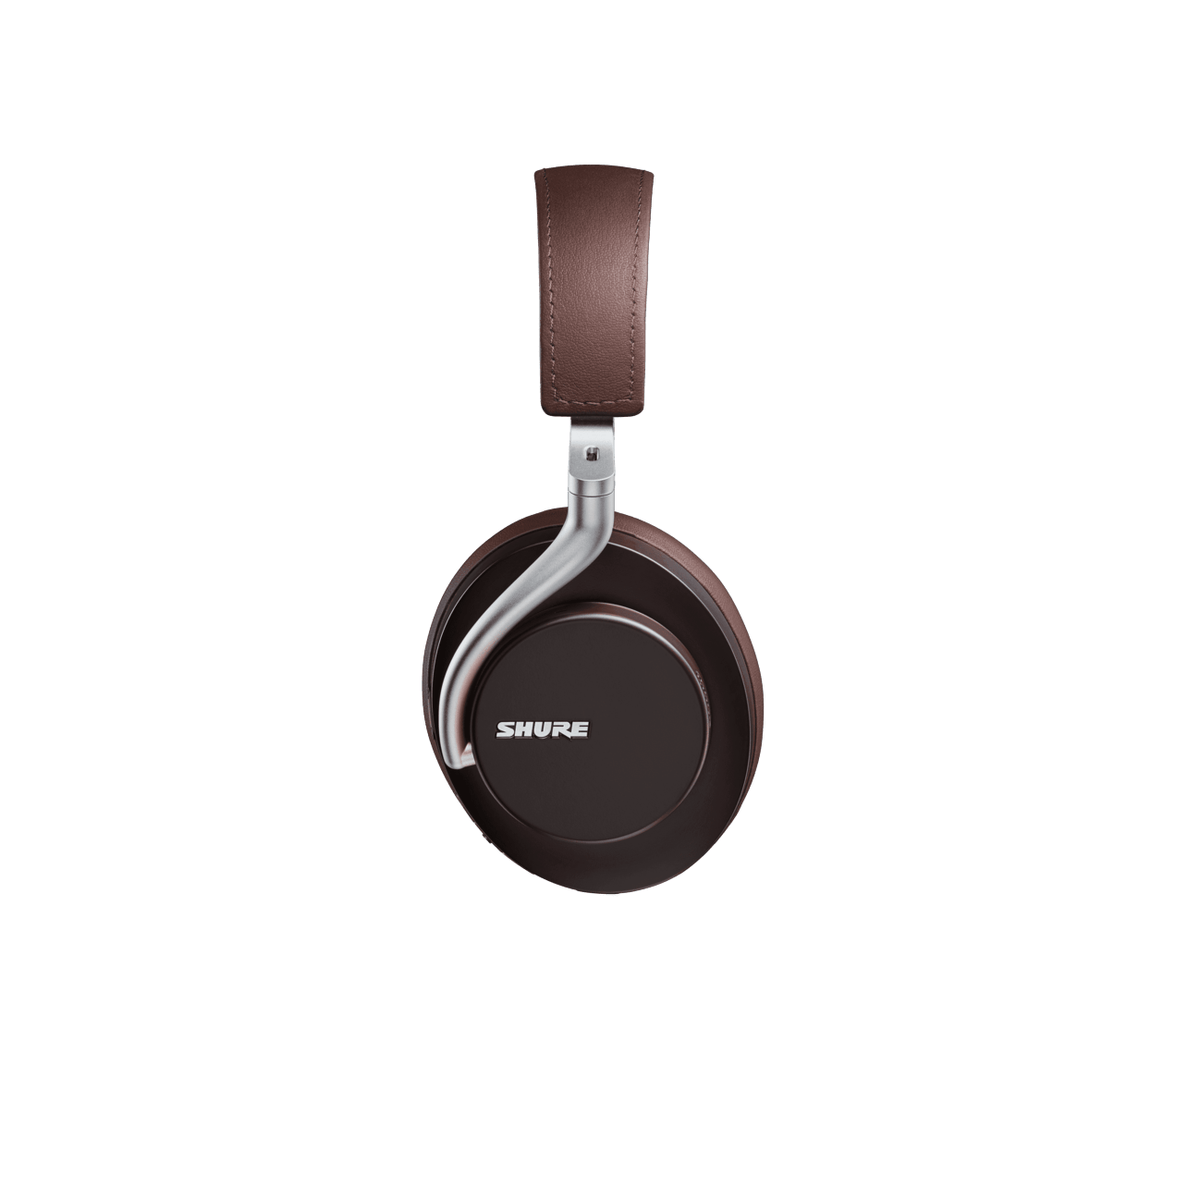 Shure Recording Shure AONIC 50 Wireless Noise Cancelling Headphones Dark Brown - Byron Music